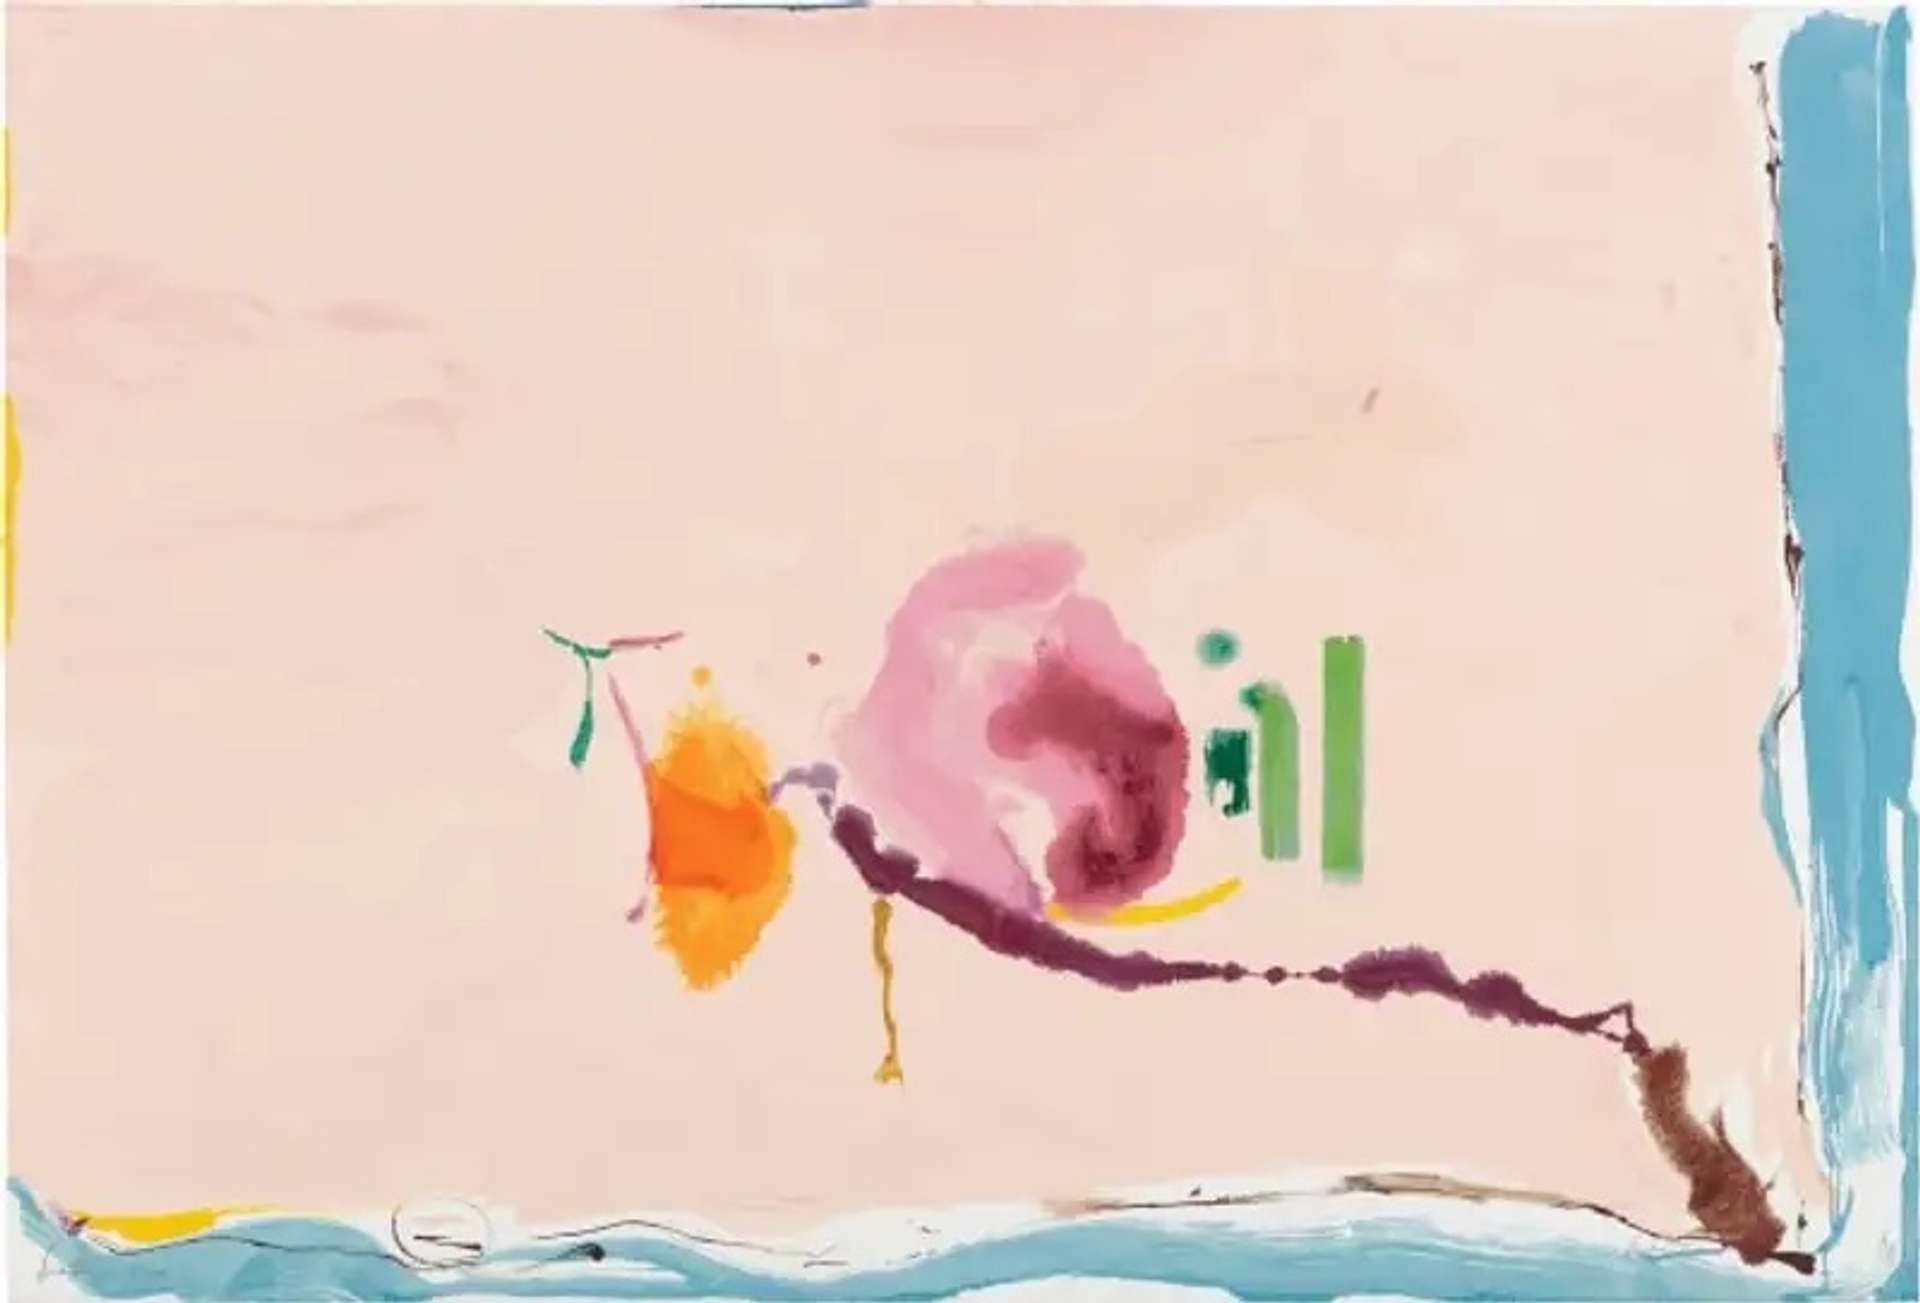 Helen Frankenthaler’s Flirt. An abstract expressionist screenprint of a landscape of a pink background with blue, red, and orange accents.